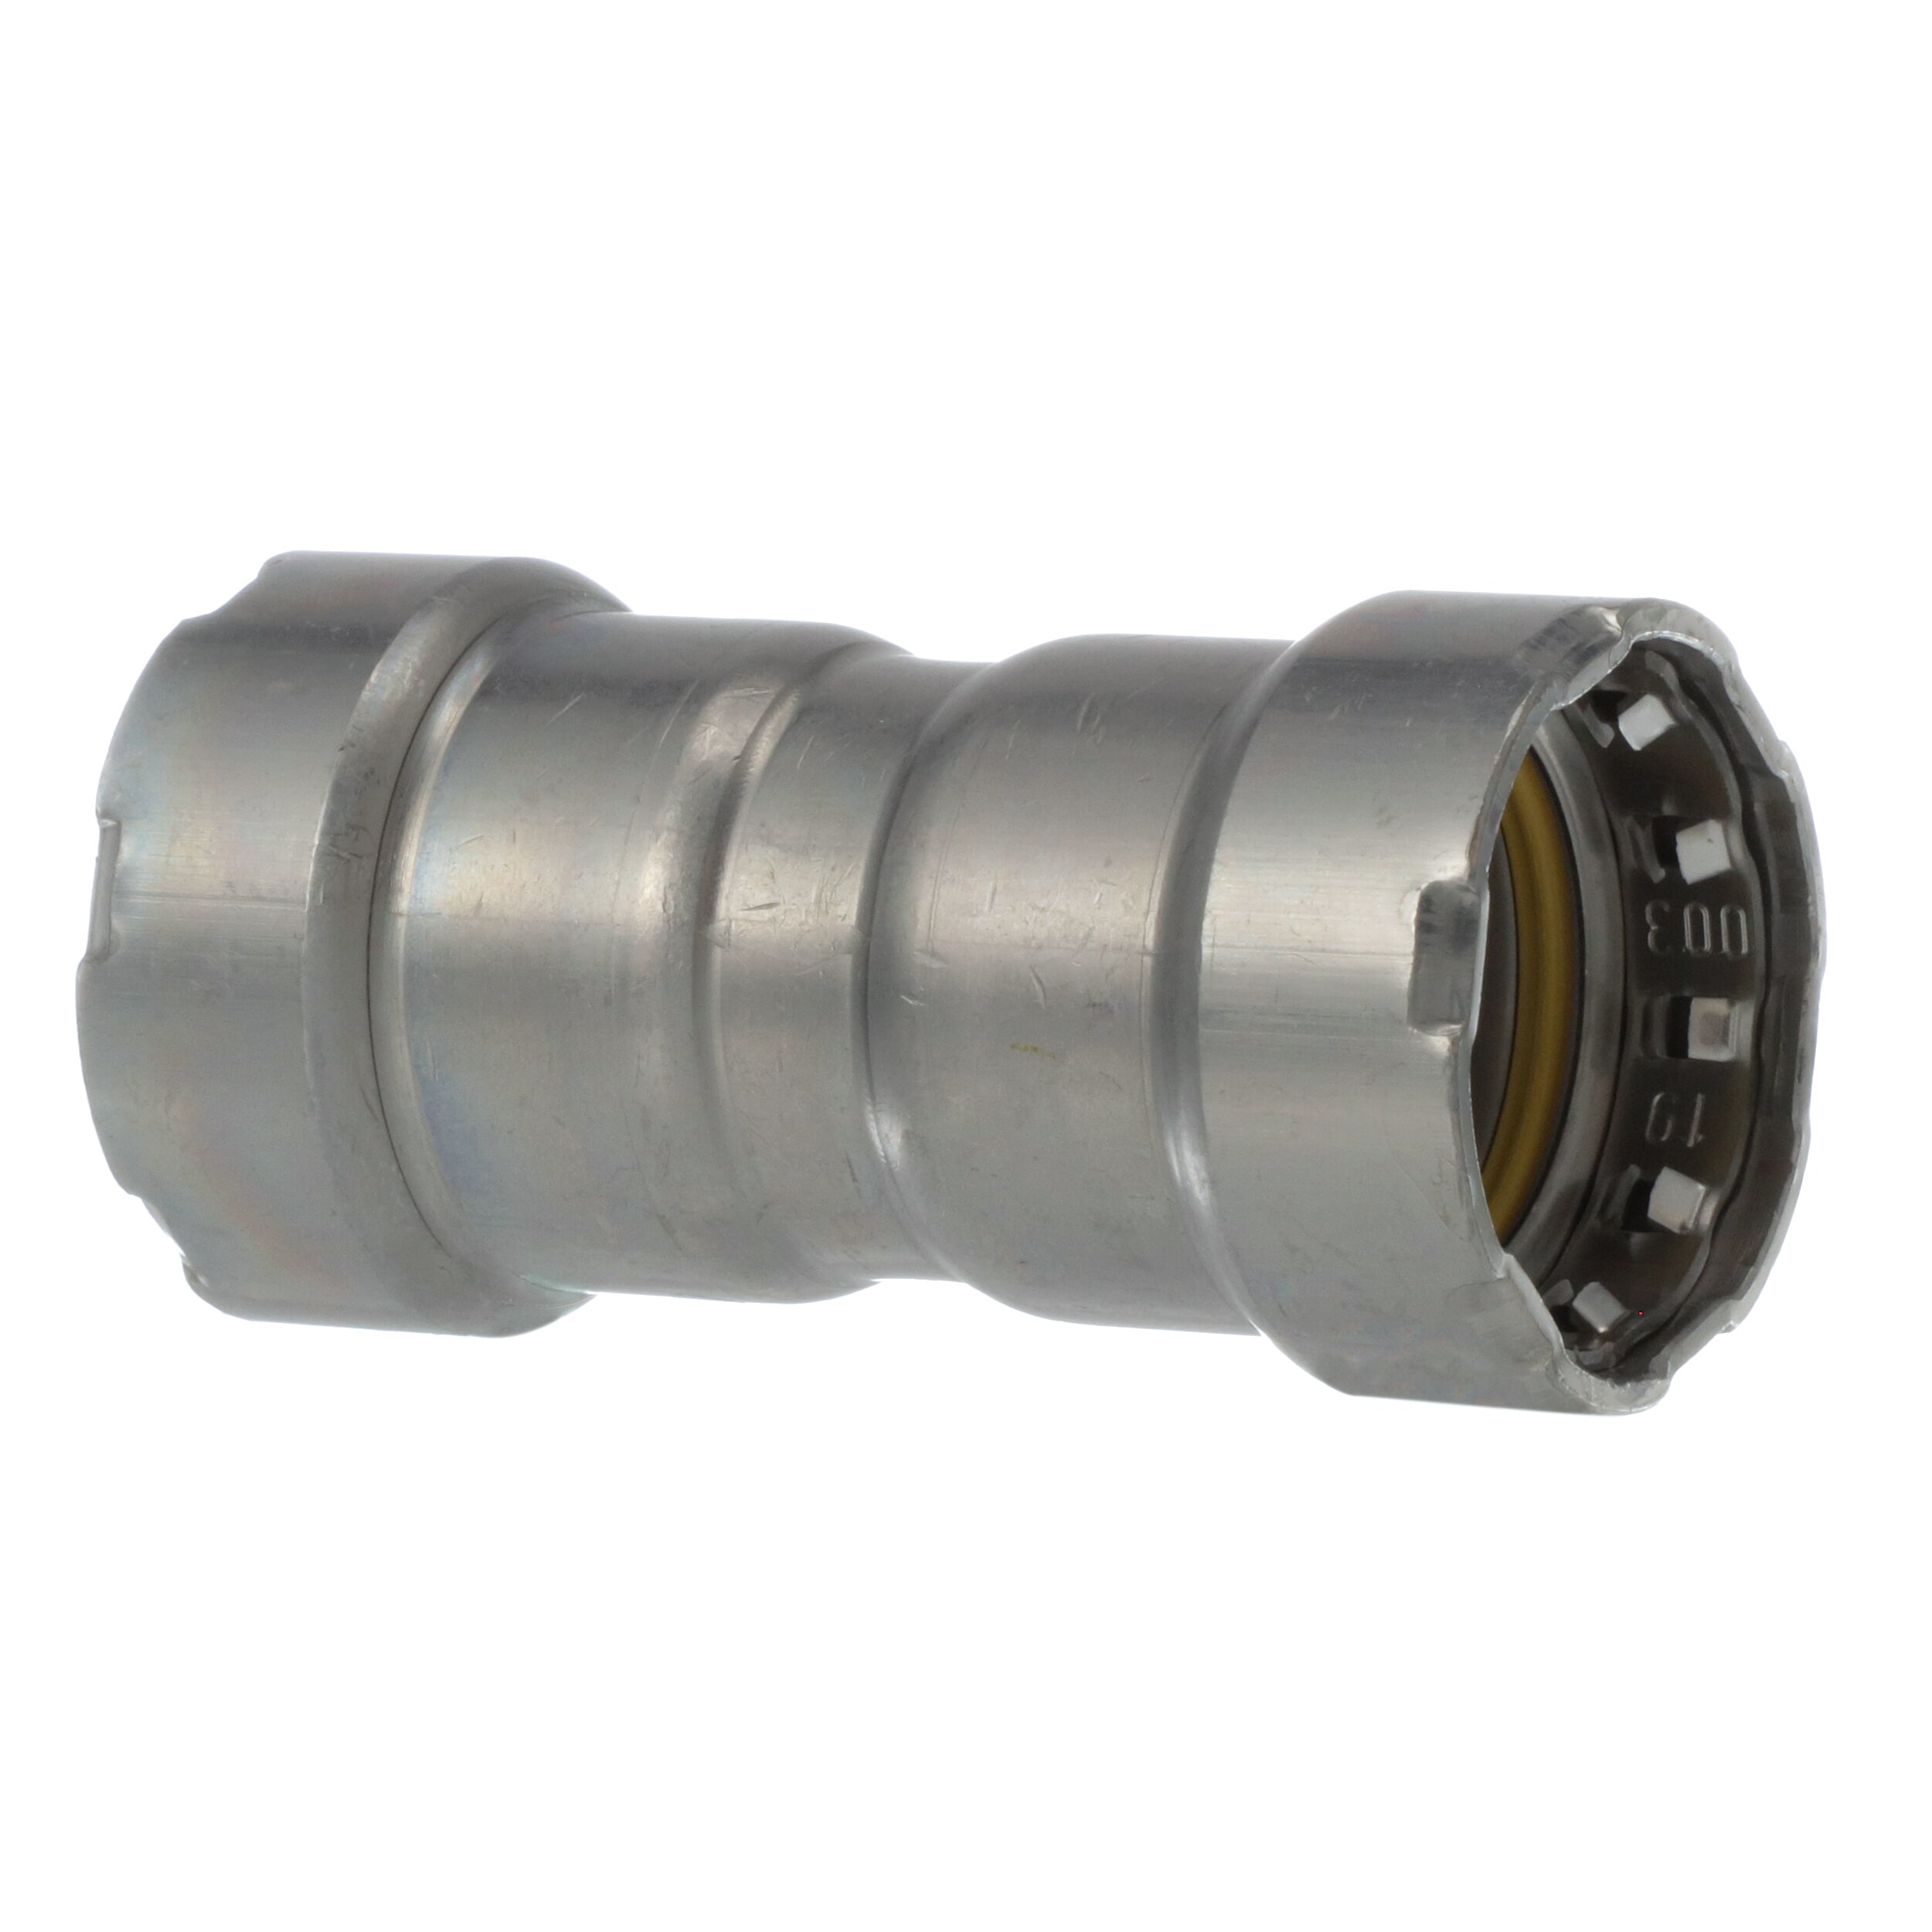 MegaPress® 22009 Pipe Coupling With Stop, 3/4 in Nominal, Press End Style, Carbon Steel